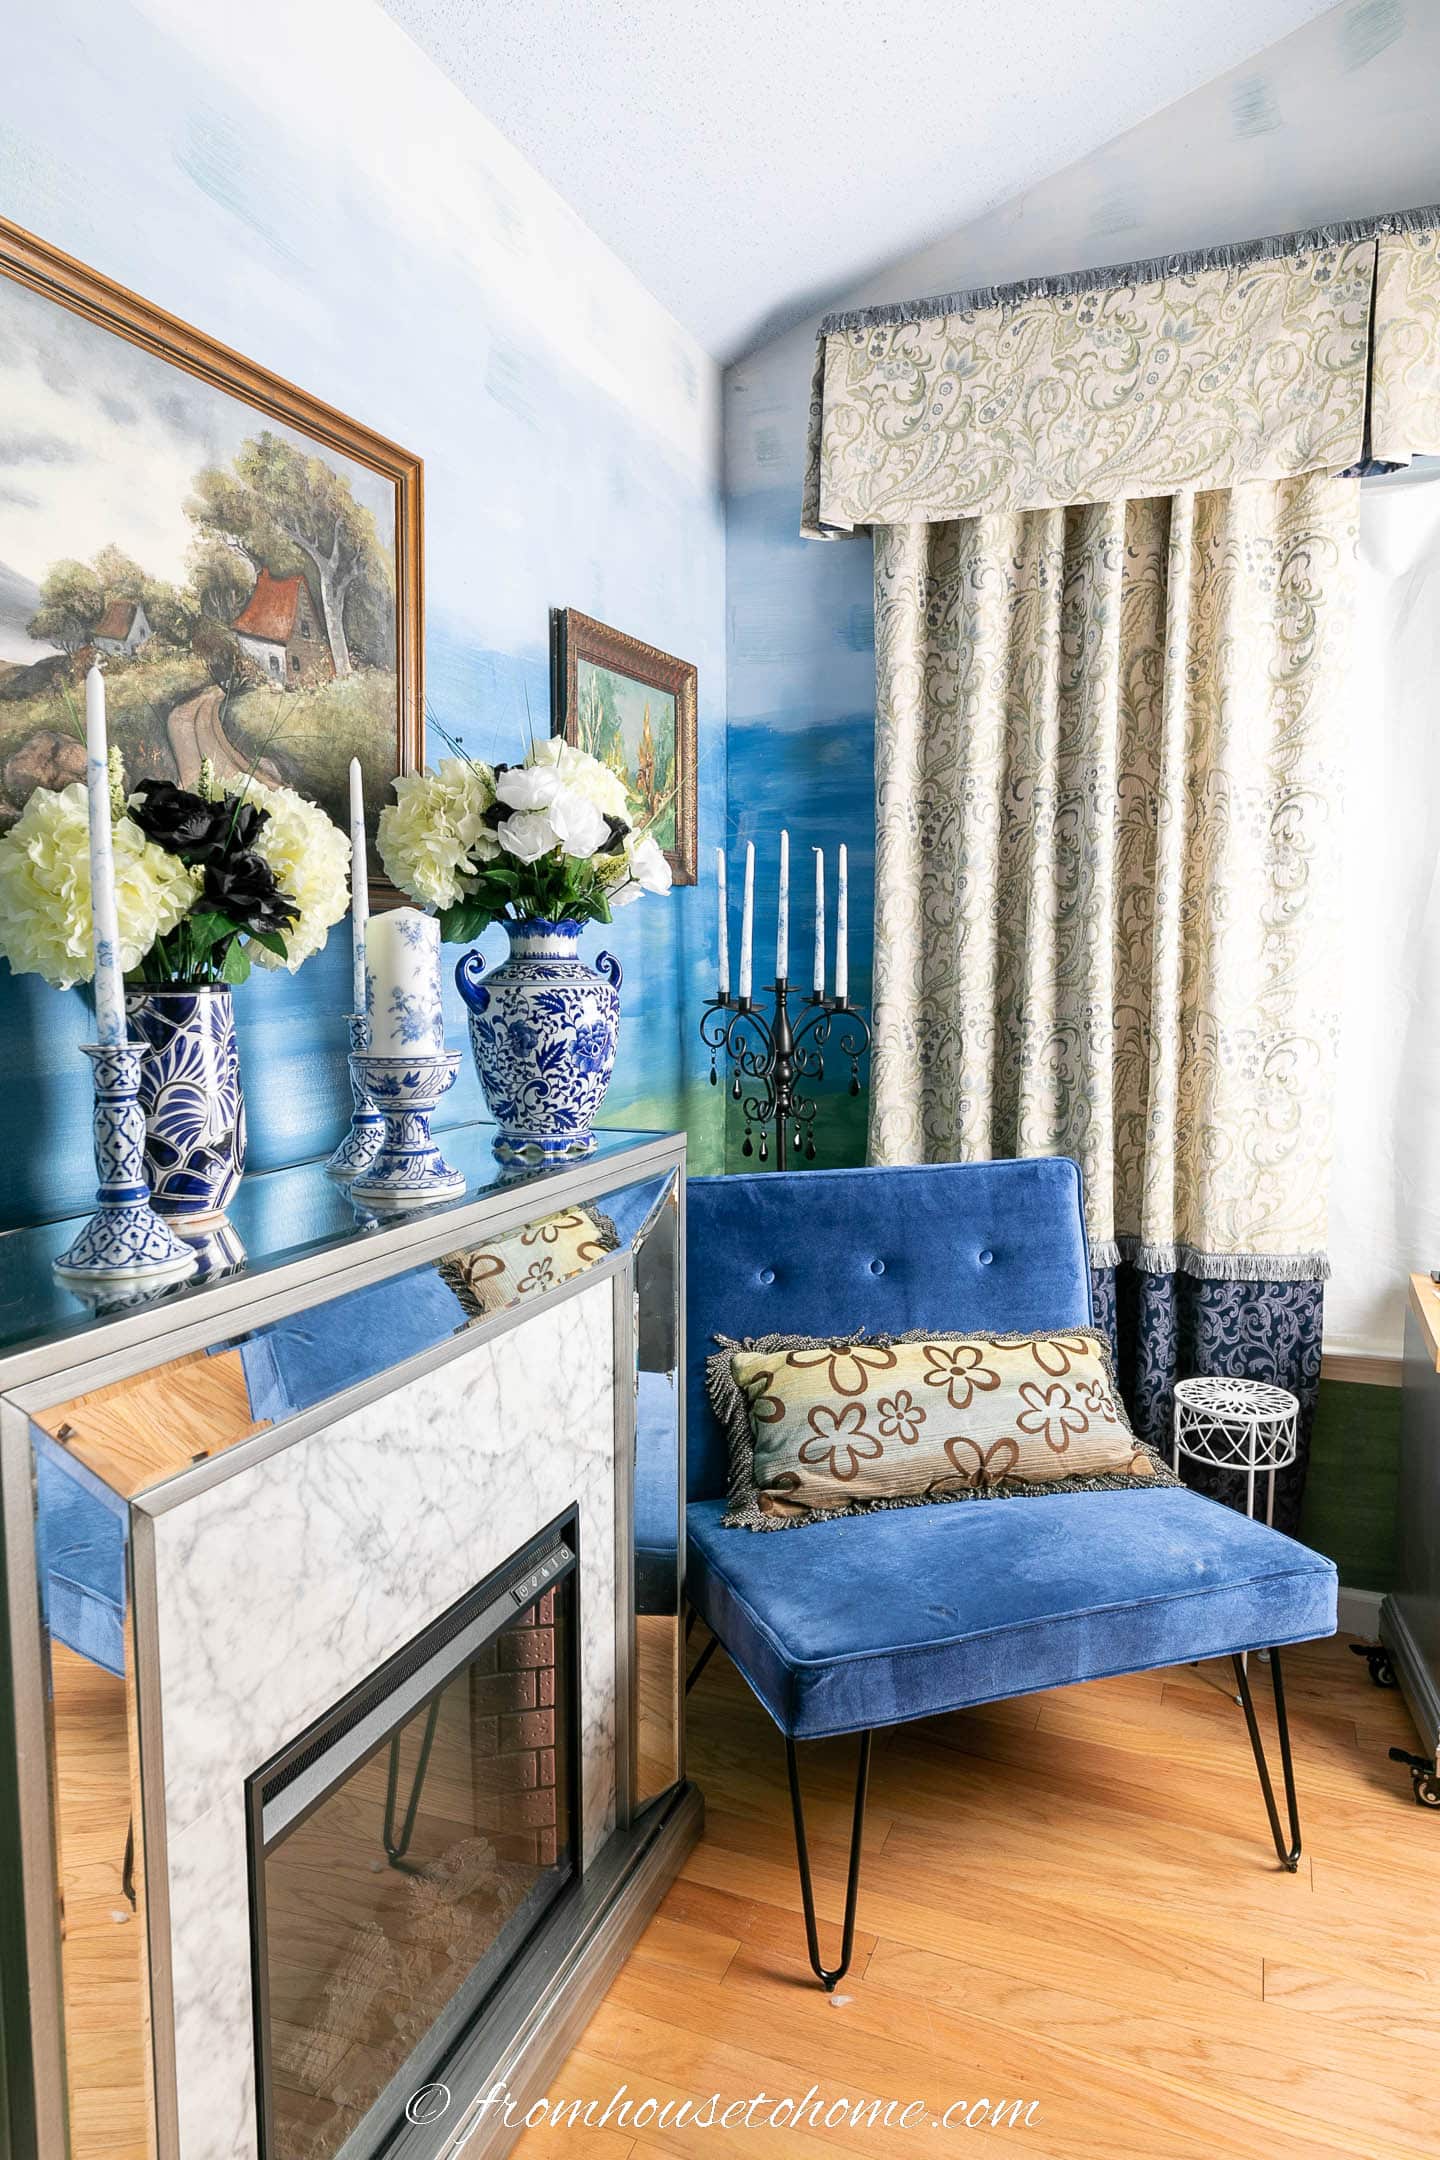 Fireplace and blue chair in a room with blue ombre walls and white and blue curtains